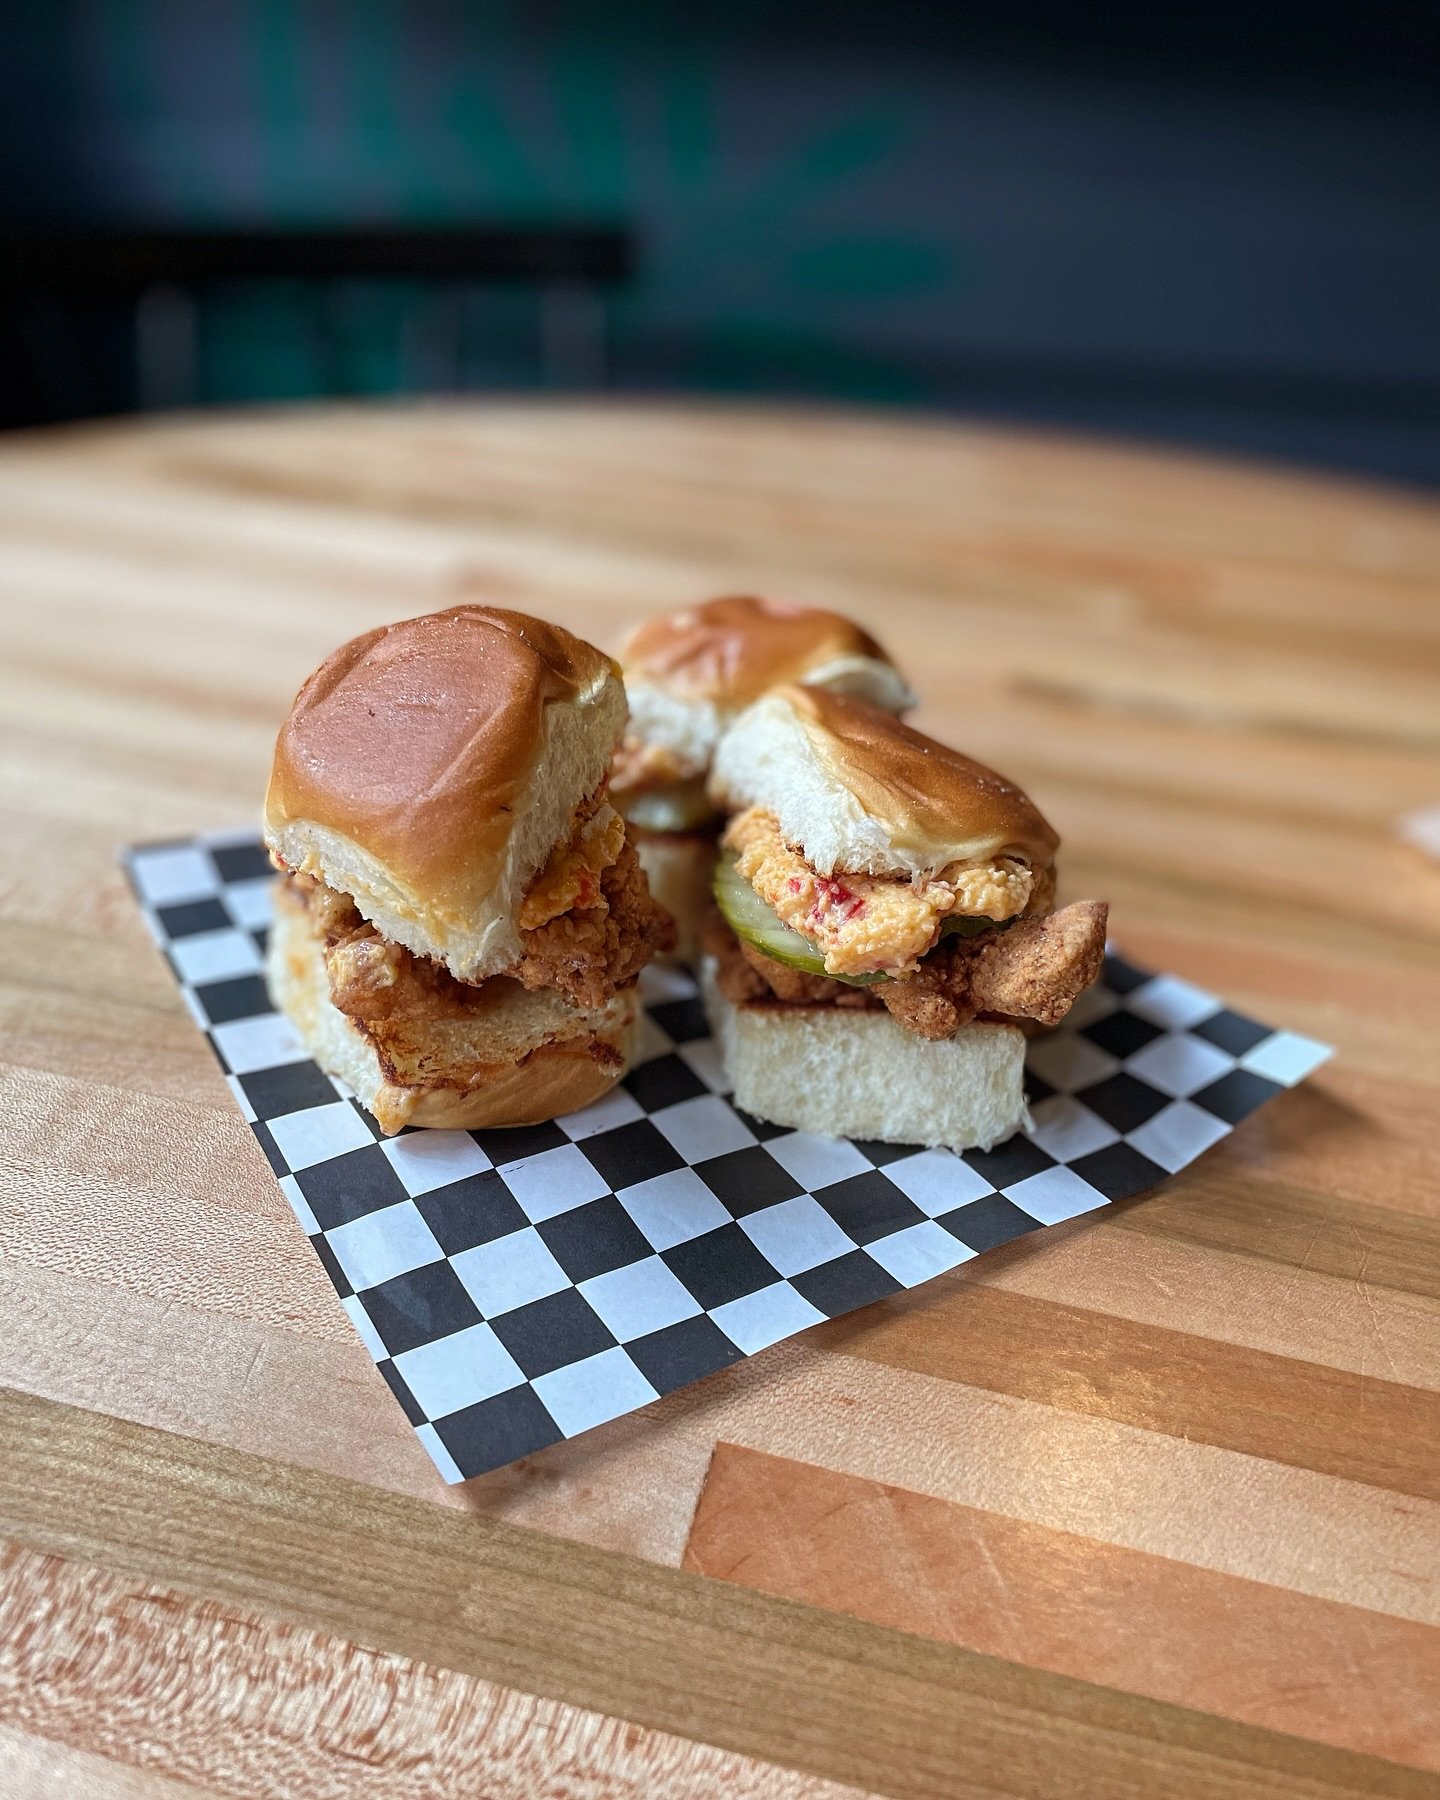 A new addition to our lunch specials - Popcorn Chicken + Pimiento Sliders 🍔 🐔

Tasty bites of Cajun Popcorn Chicken, tangy pimiento cheese, pickles on a sweet Hawaiian slider roll 😍

3 per order for only $10 💥 grab some for mom or get it delivere